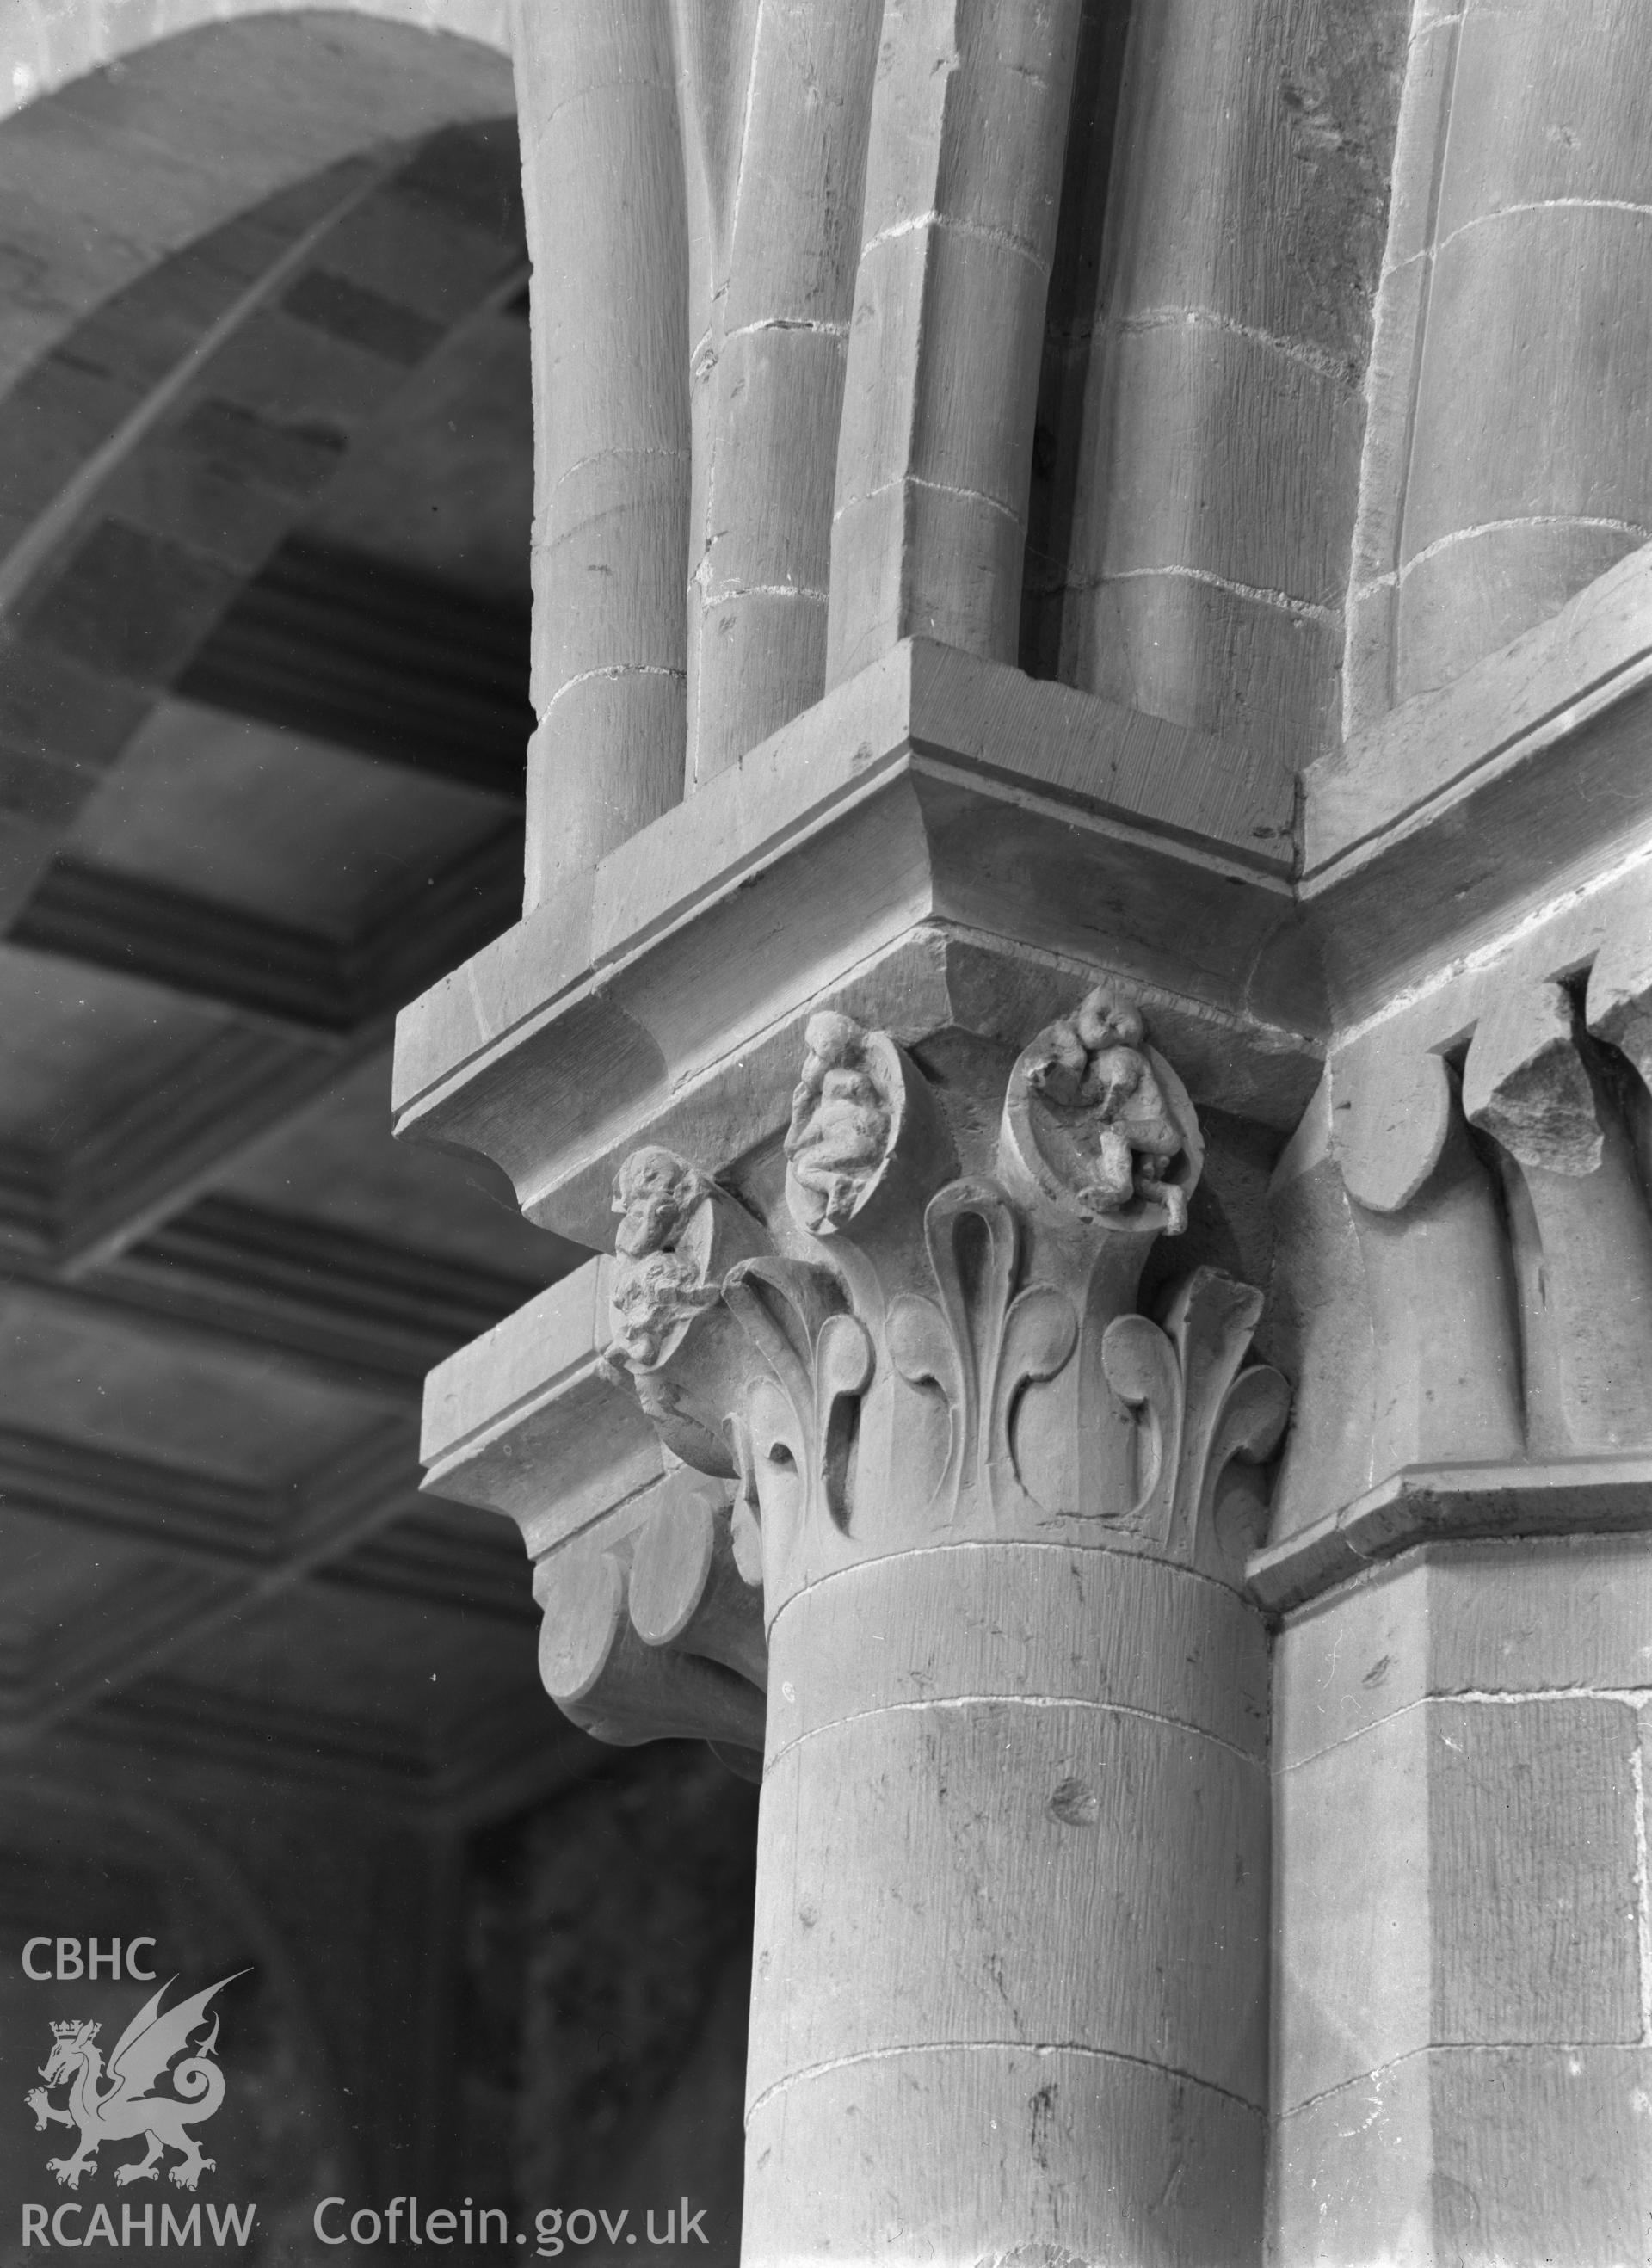 Digital copy of a black and white nitrate negative showing detail view of capital  at St. David's Cathedral, taken by E.W. Lovegrove, July 1936.